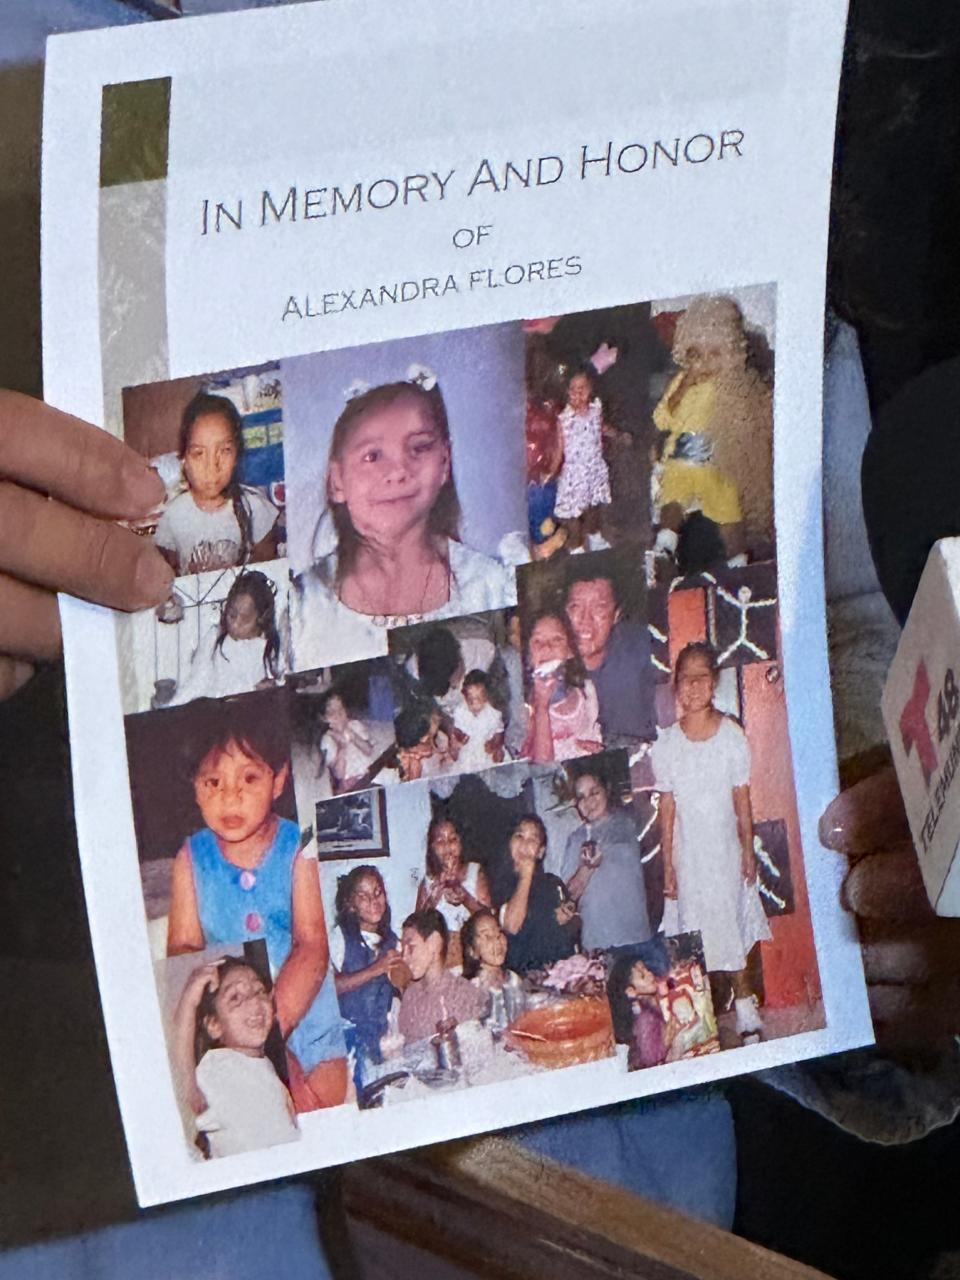 A poster with photos of Alexandra Flores was held up by her siblings, Sandra Frausto and Ignacio Frausto, during a news conference Nov. 16, 2023, at the Texas Department of Criminal Justice's Huntsville Unit after the execution of the man, David Santiago Renteria, who abducted and killed Alexandra in 2001.